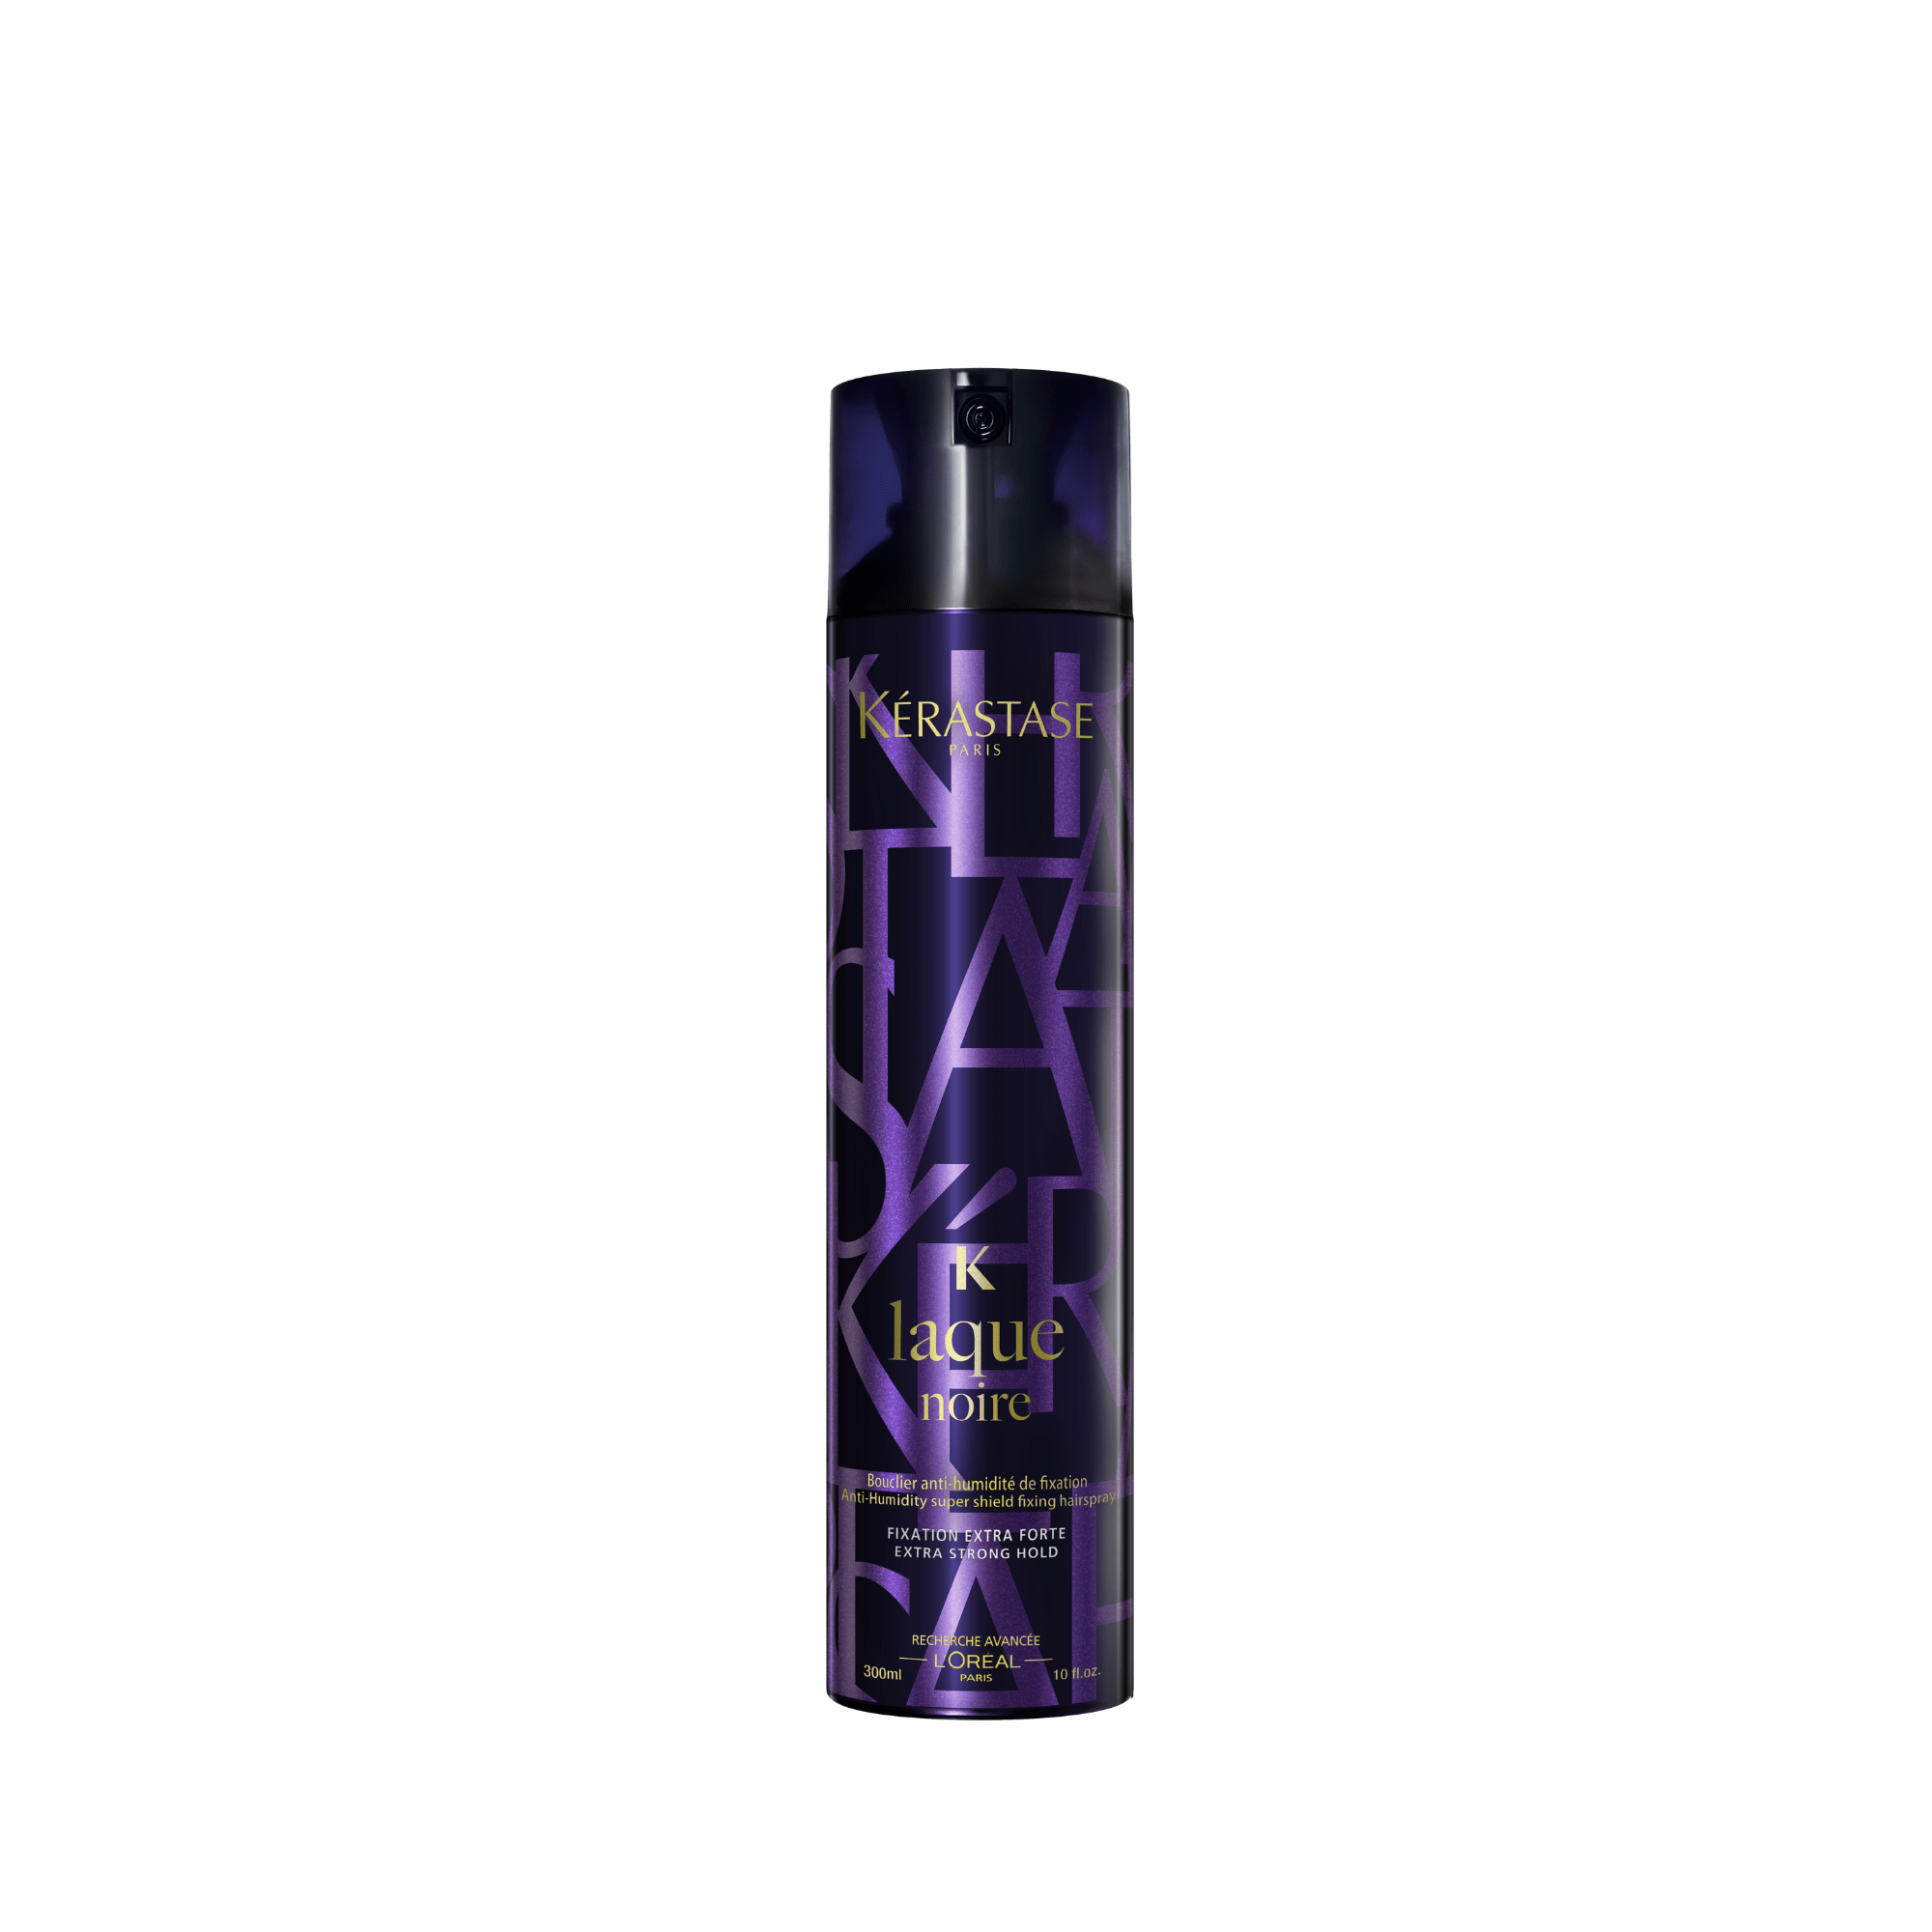 KÉRASTASE Styling STYLING Cout Laque Noire 300Ml Roberta Beauty Club